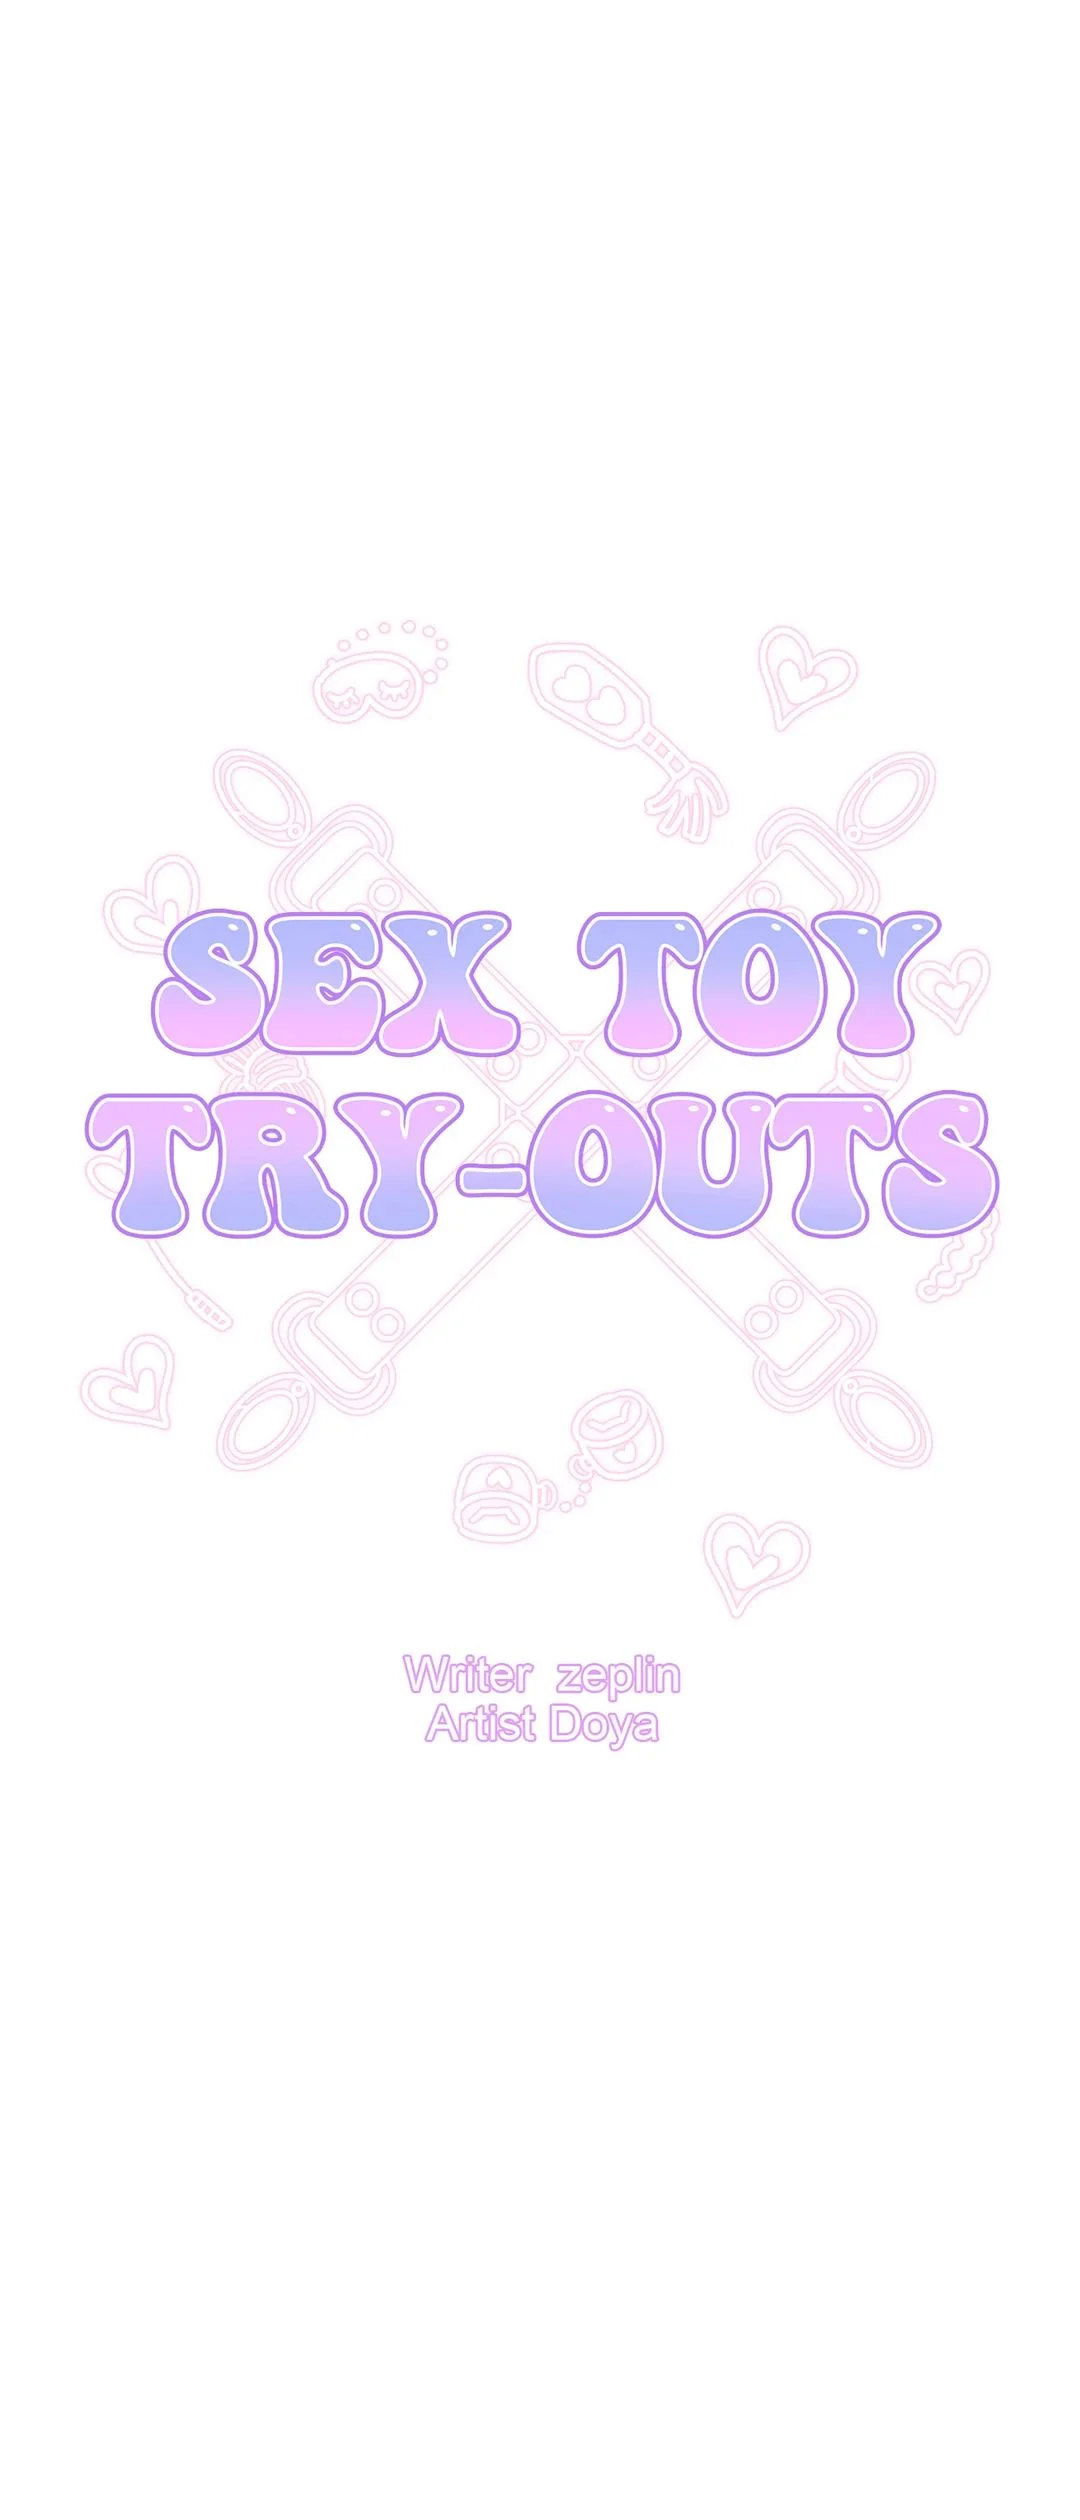 sex-toy-try-outs-chap-22-3